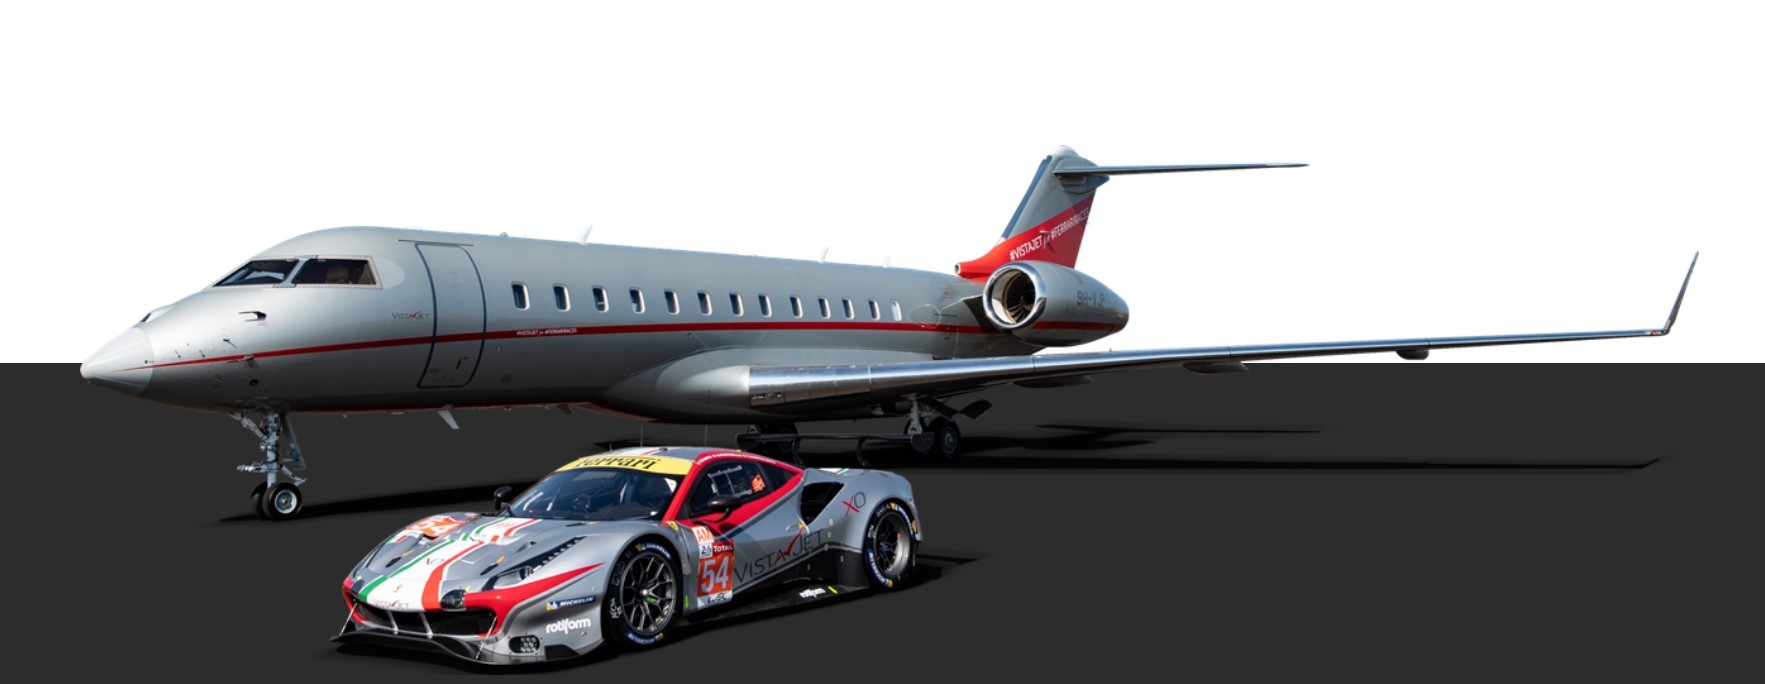 inside-ferrari-s-luxury-private-jet-used-by-charles-leclerc-and-carlos-sainz-between-races-183...jpg